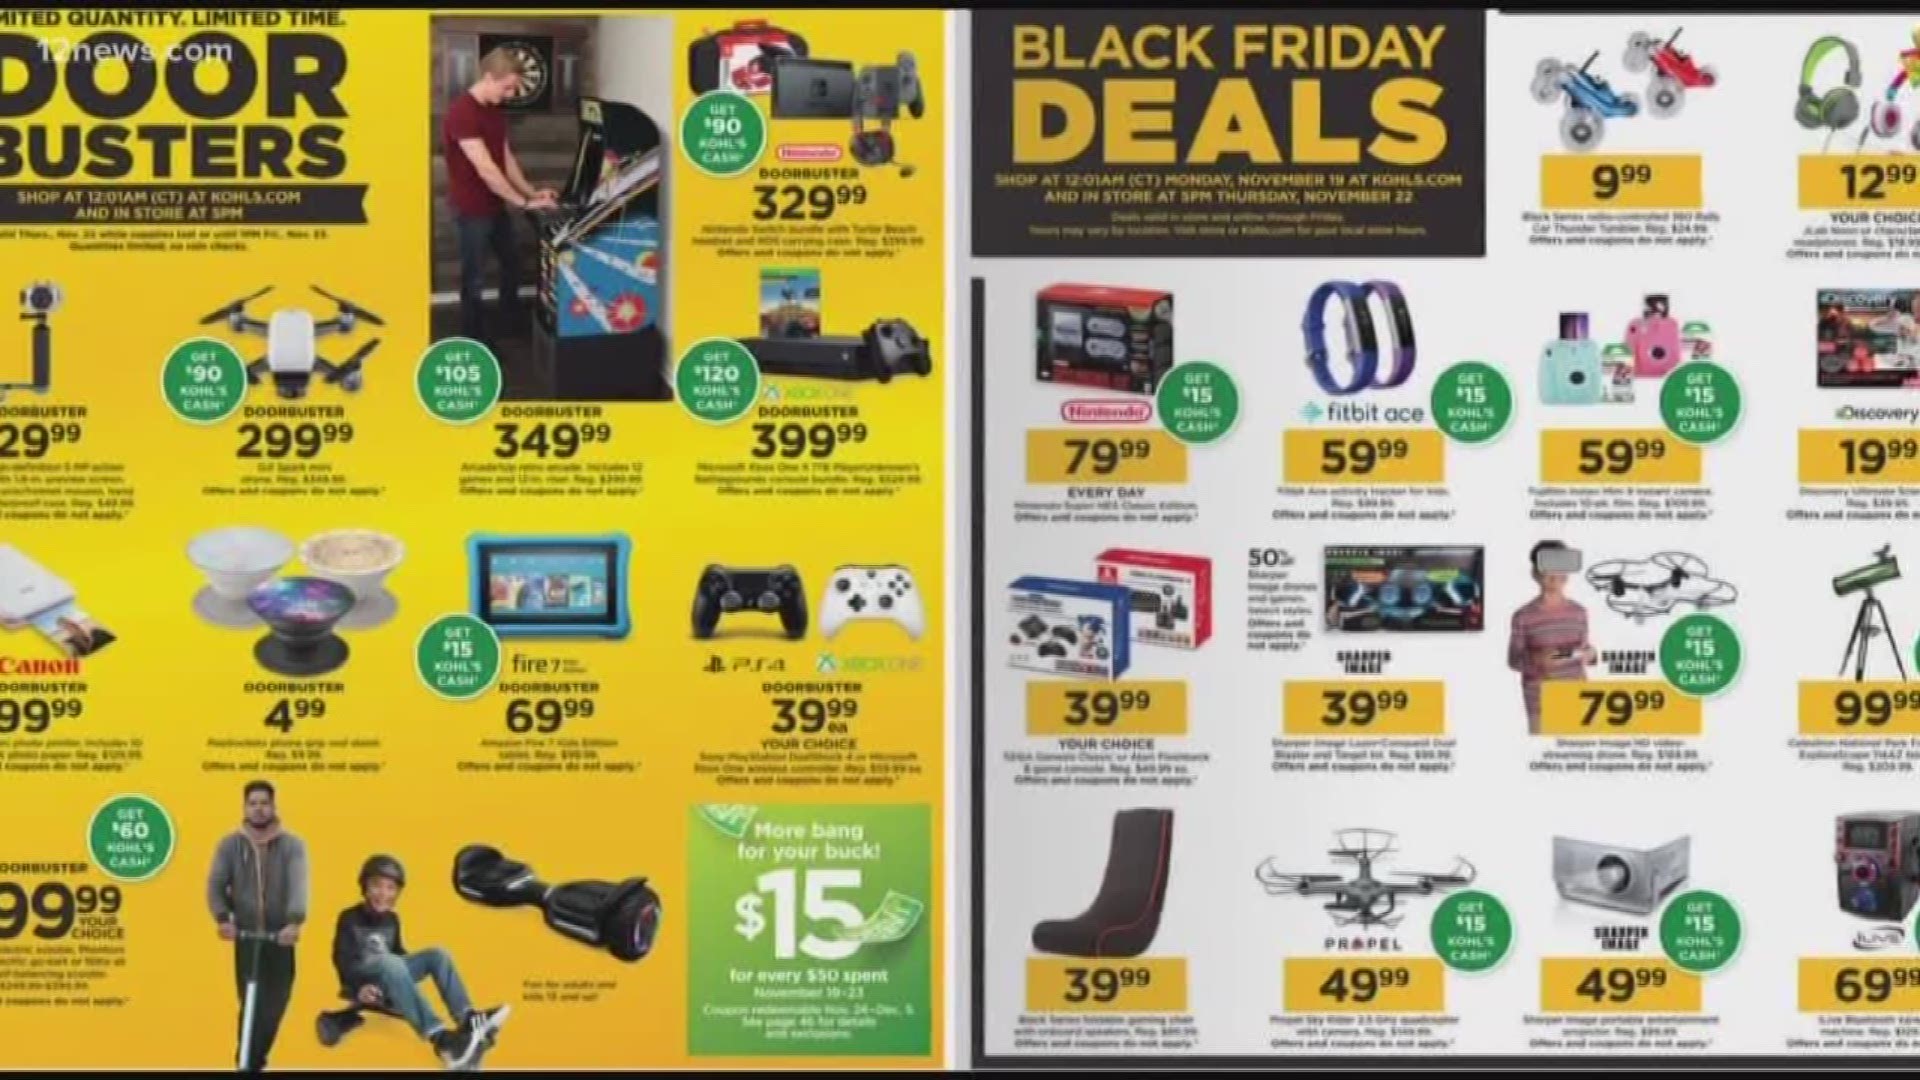 If you're in the market for deals, here are some top deals at Kohl's, Costco and Target for Black Friday.